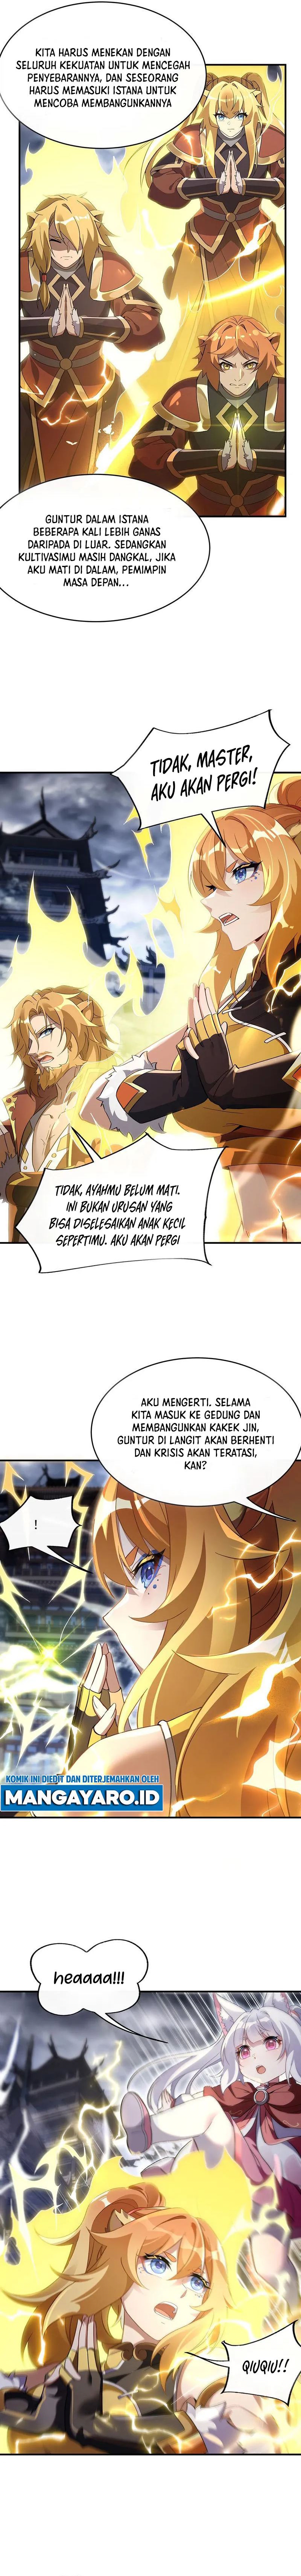 Dilarang COPAS - situs resmi www.mangacanblog.com - Komik my female apprentices are all big shots from the future 231 - chapter 231 232 Indonesia my female apprentices are all big shots from the future 231 - chapter 231 Terbaru 9|Baca Manga Komik Indonesia|Mangacan